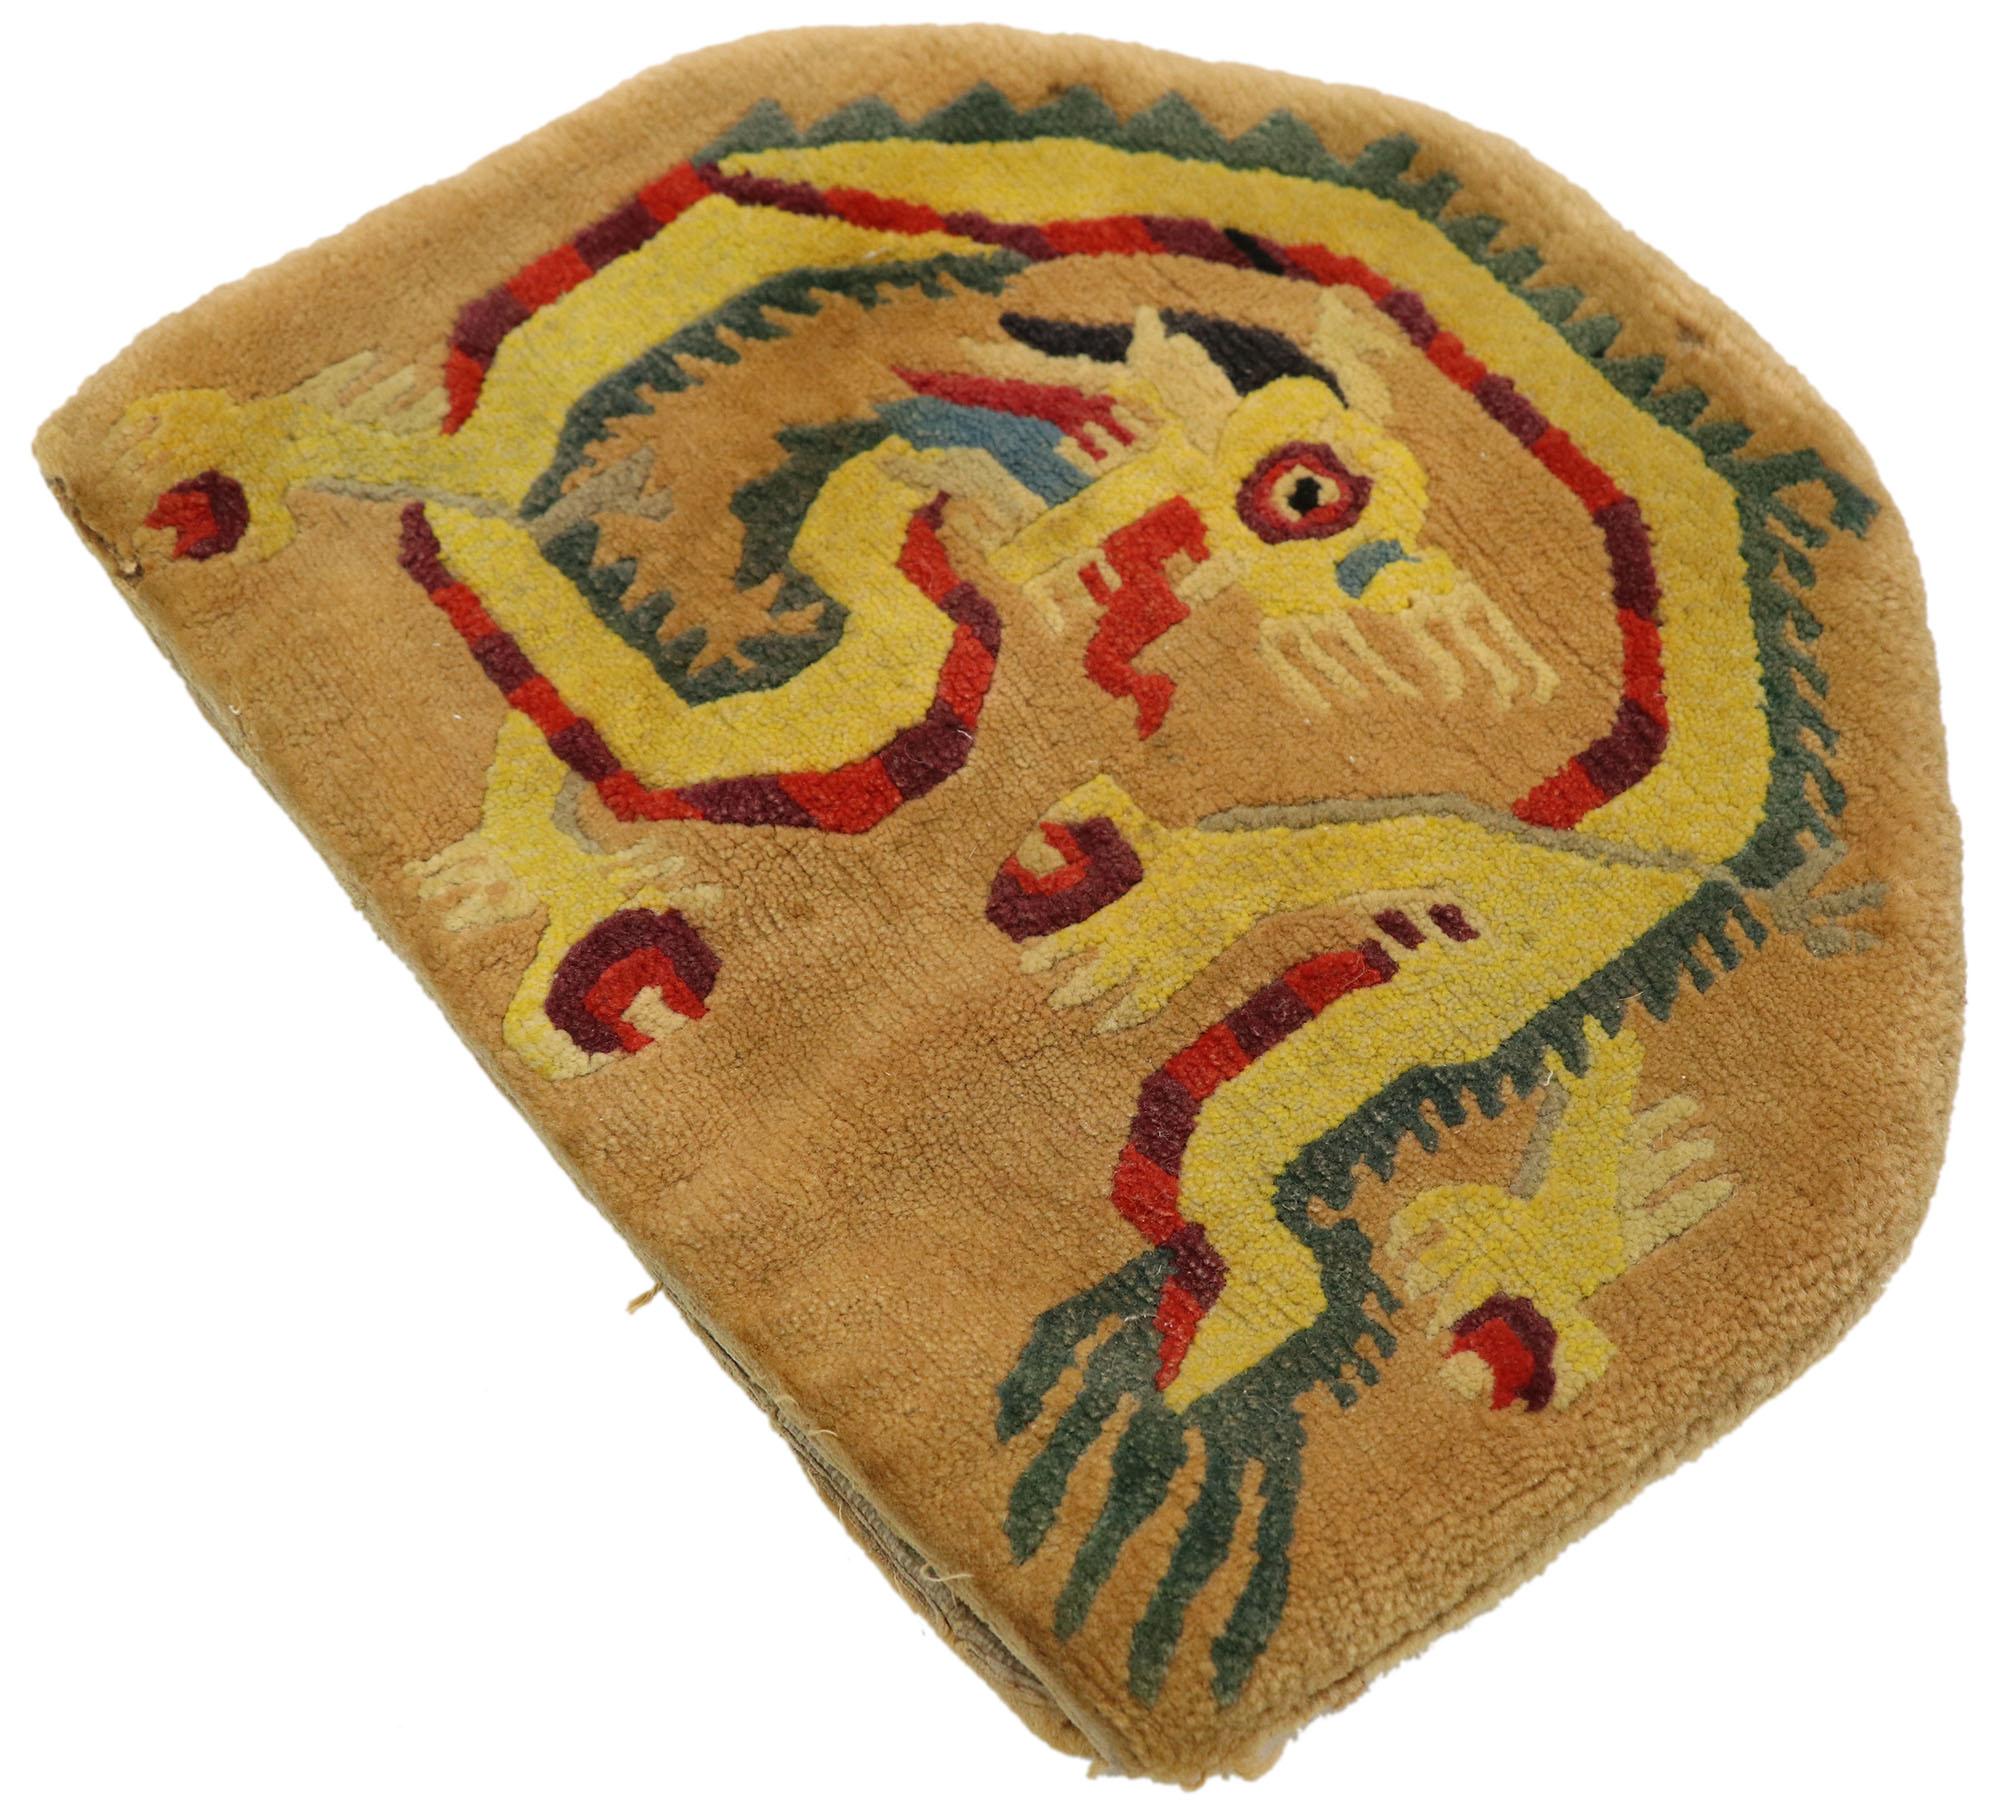 77426 antique Tibetan wool tea cozy with dragon design, late 19th century tea cosy. With its exotic dragon pictorial design and vibrant colors, this hand knotted wool antique Tibetan Tea Cozy is poised to impress. Tea cozies are used to put over a